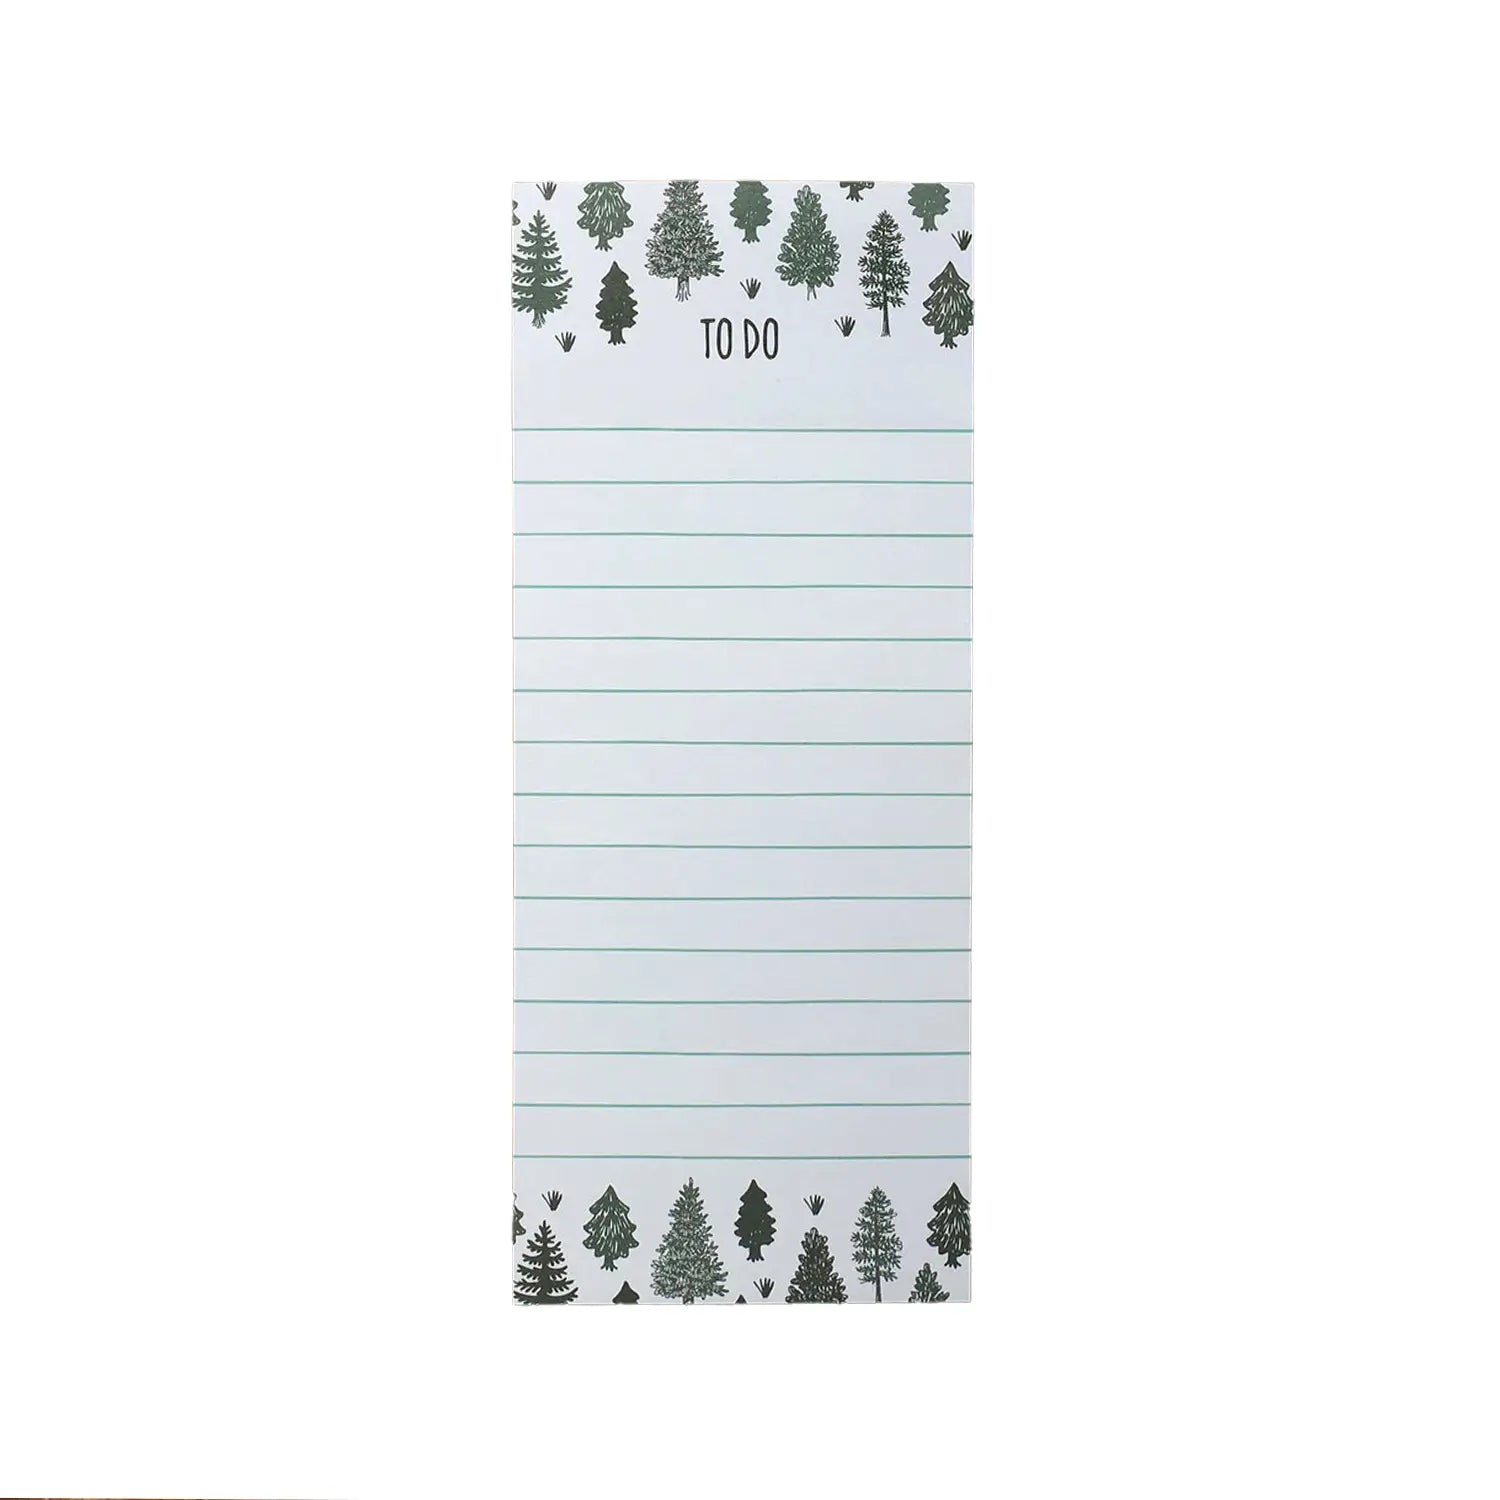 White notepad with green lined paper. Dark green text reads "to do." Dark green evergreen trees at the top and bottom of the notepad. 